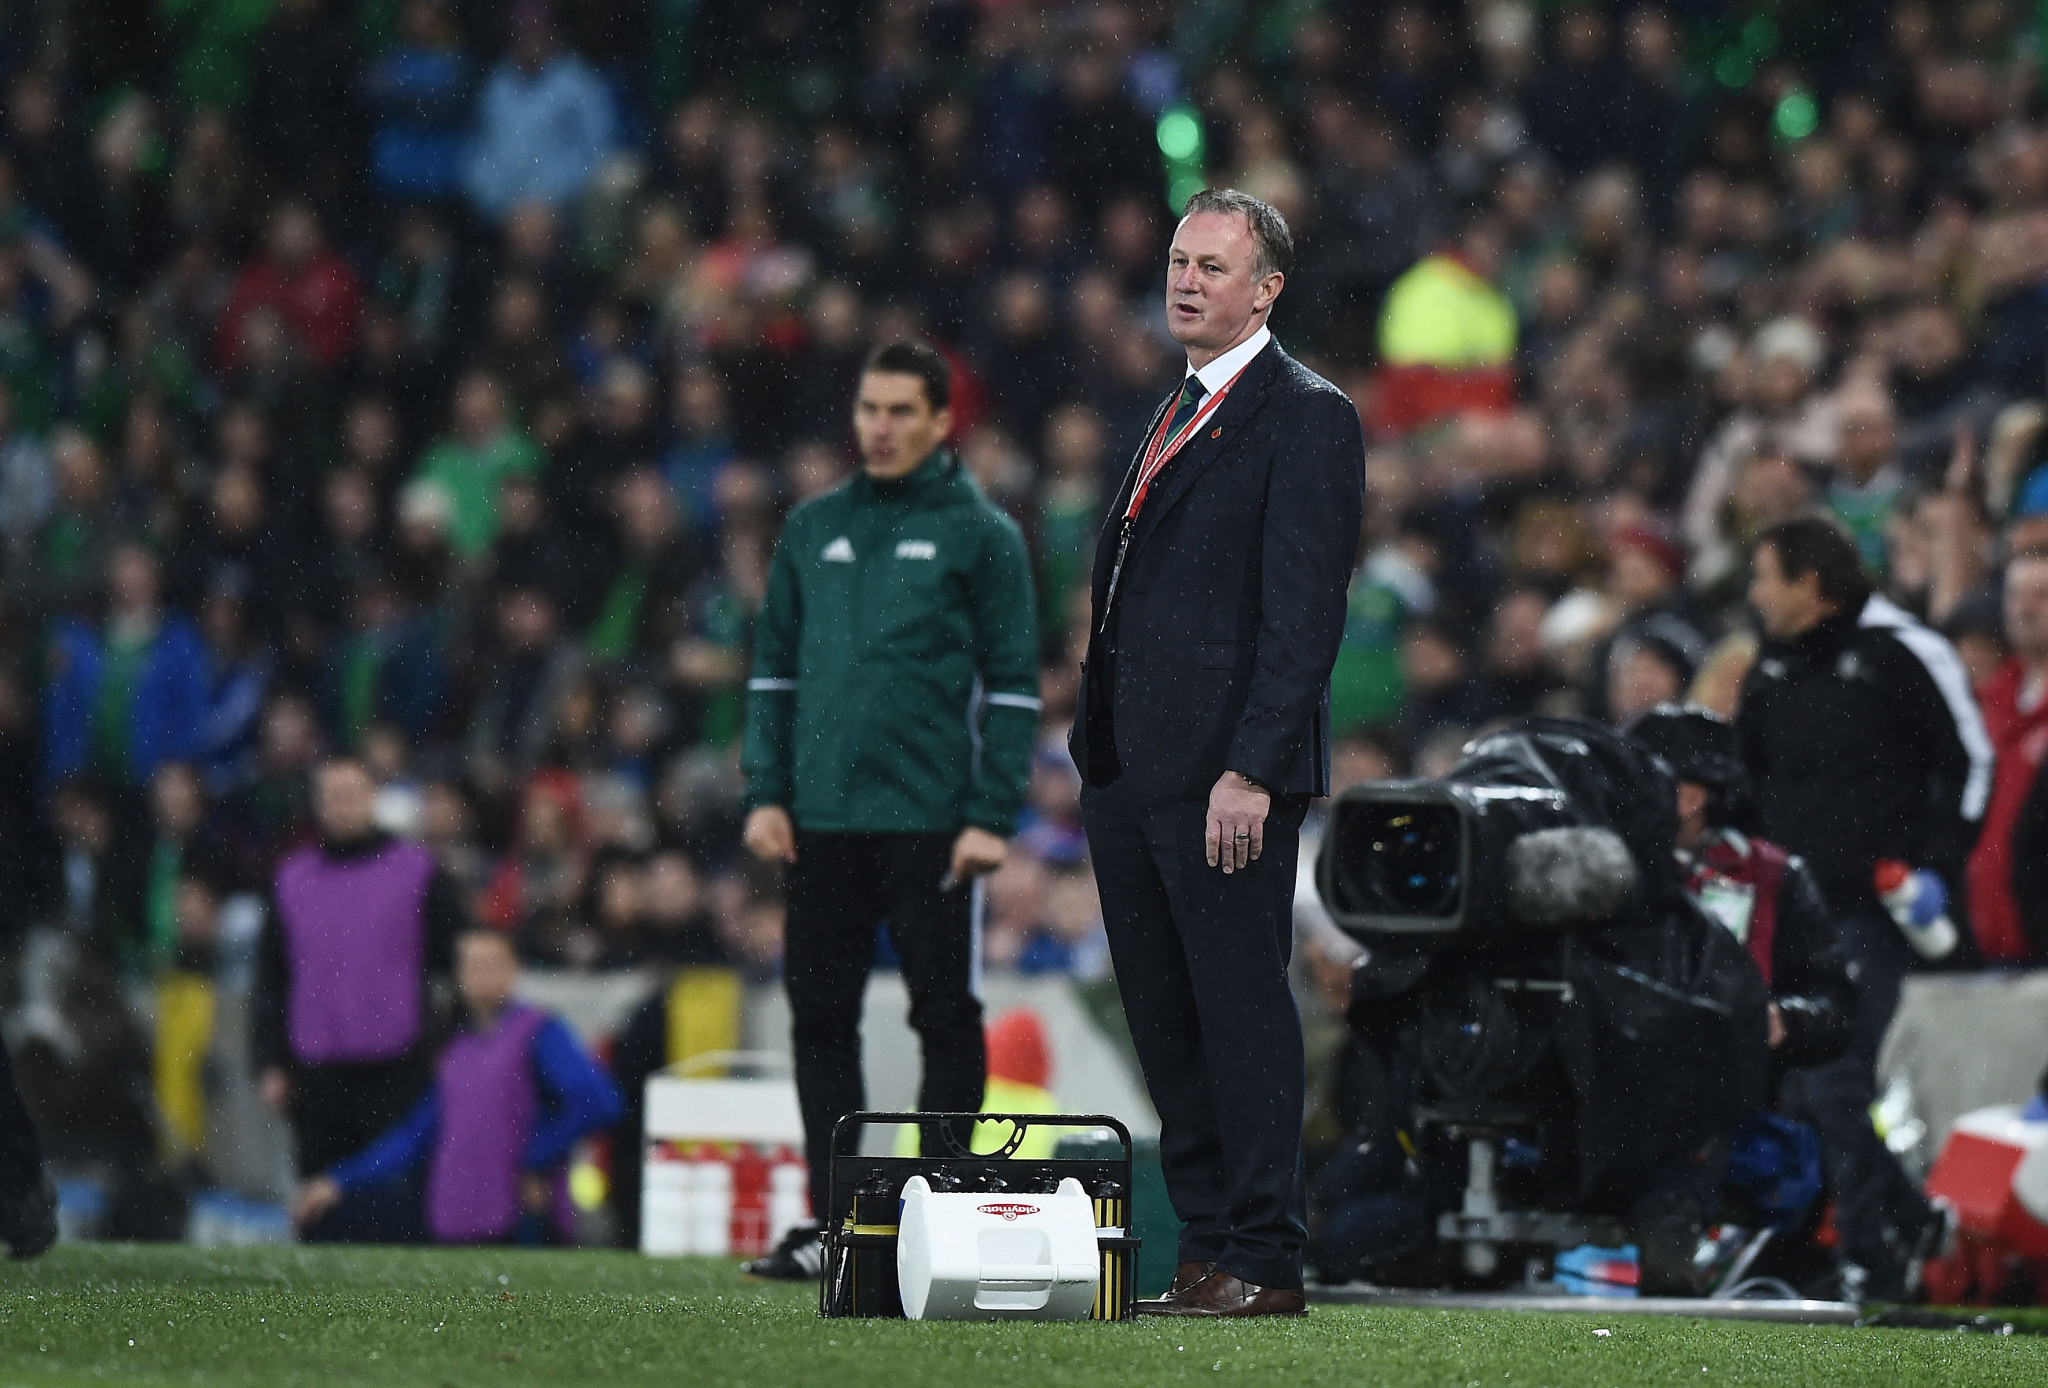 Northern Ireland manager Michael O'Neill was heavily critical of a refereeing decision which saw his side slump to a 1-0 defeat to Switzerland ©Getty Images